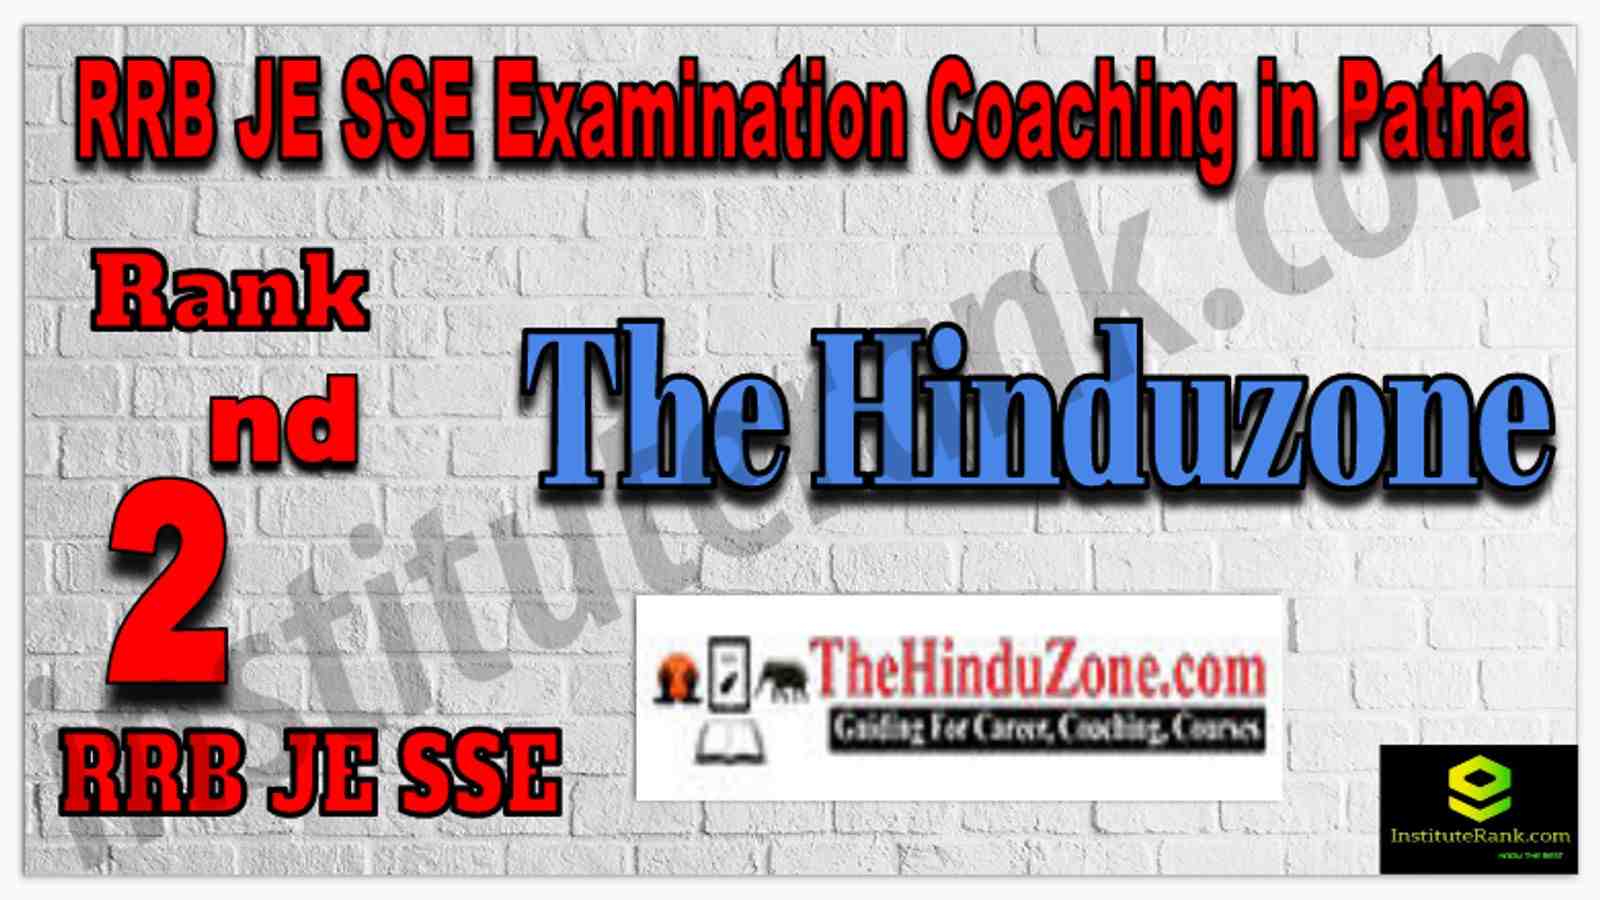 Rank 2nd RRB JE SSE Examination Coaching Institute in Patna